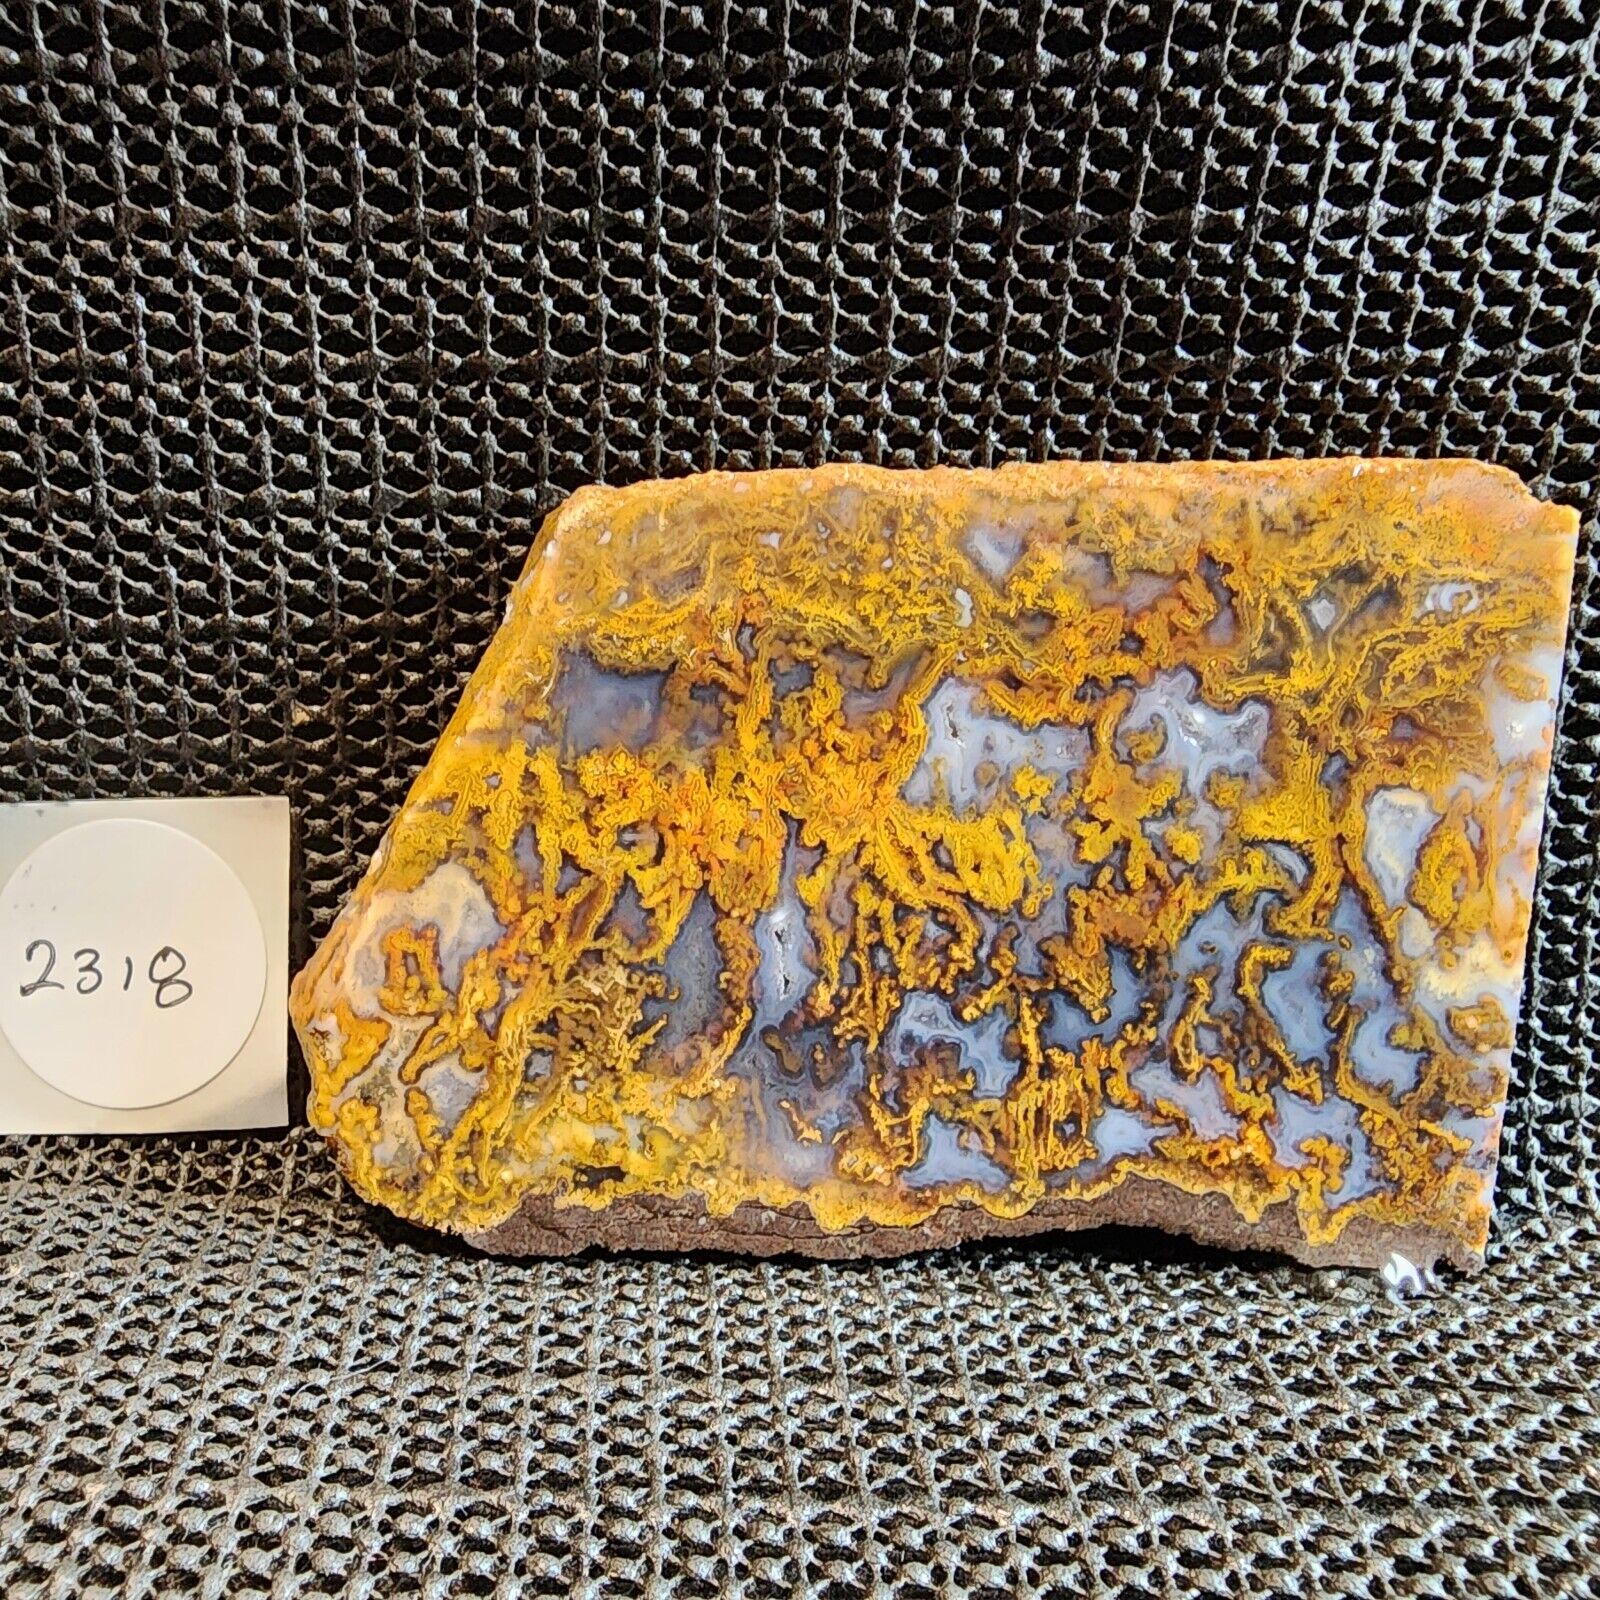 Gorgeous GOLD Plume Agate Slab, Cab/Collect, Incredible Color and Design, Mexico